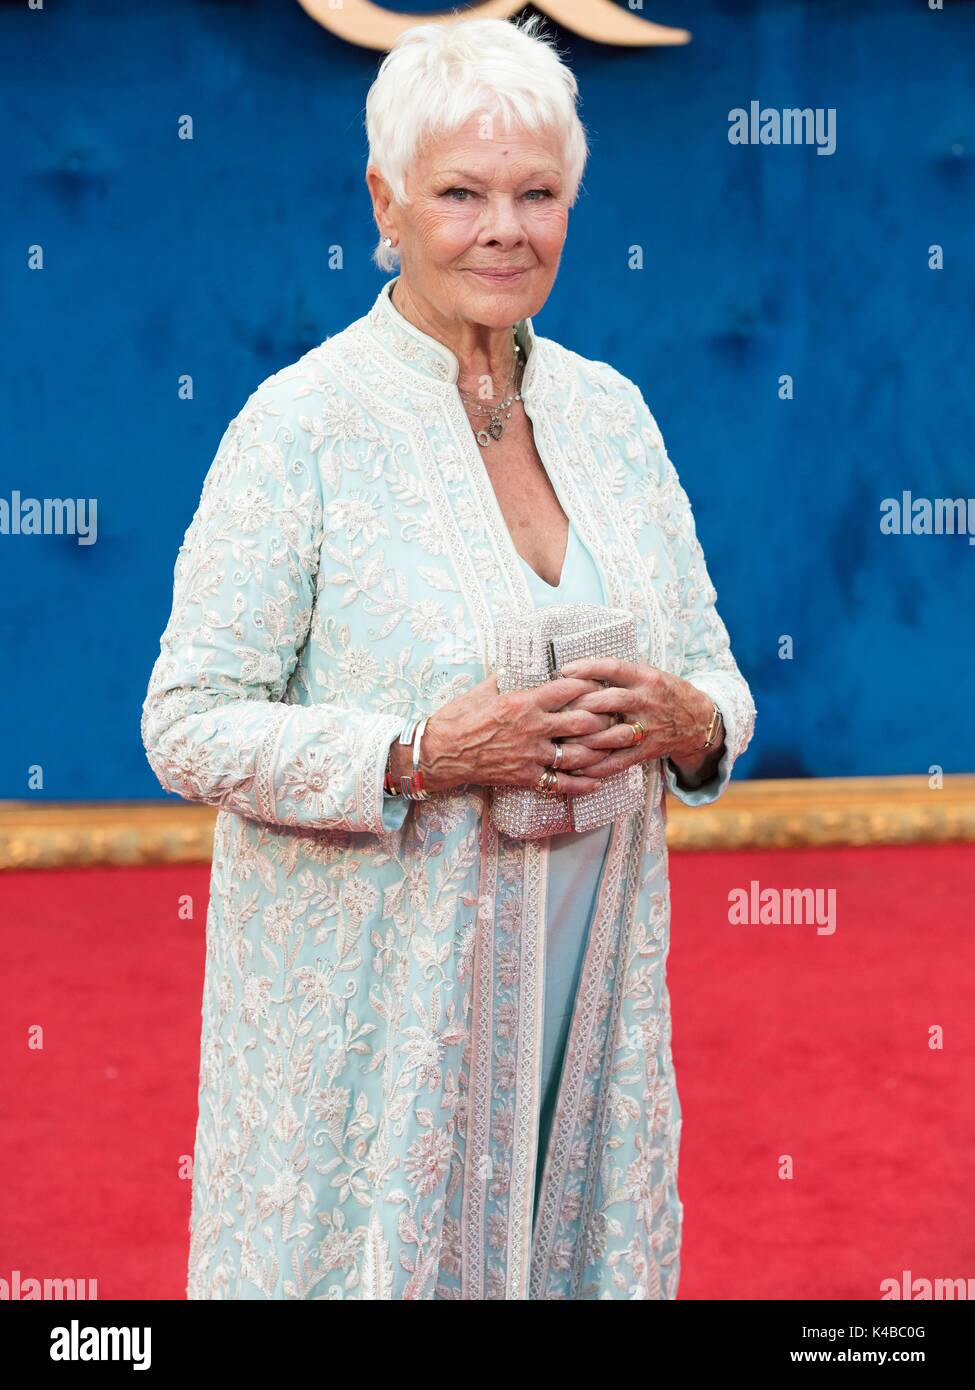 London, United Kingdom Of Great Britain And Northern Ireland. 05th Sep, 2017. Judi Dench attends VICTORIA & ABDUL - UK Premiere - London, England (05/09/2017) | usage worldwide Credit: dpa/Alamy Live News Stock Photo